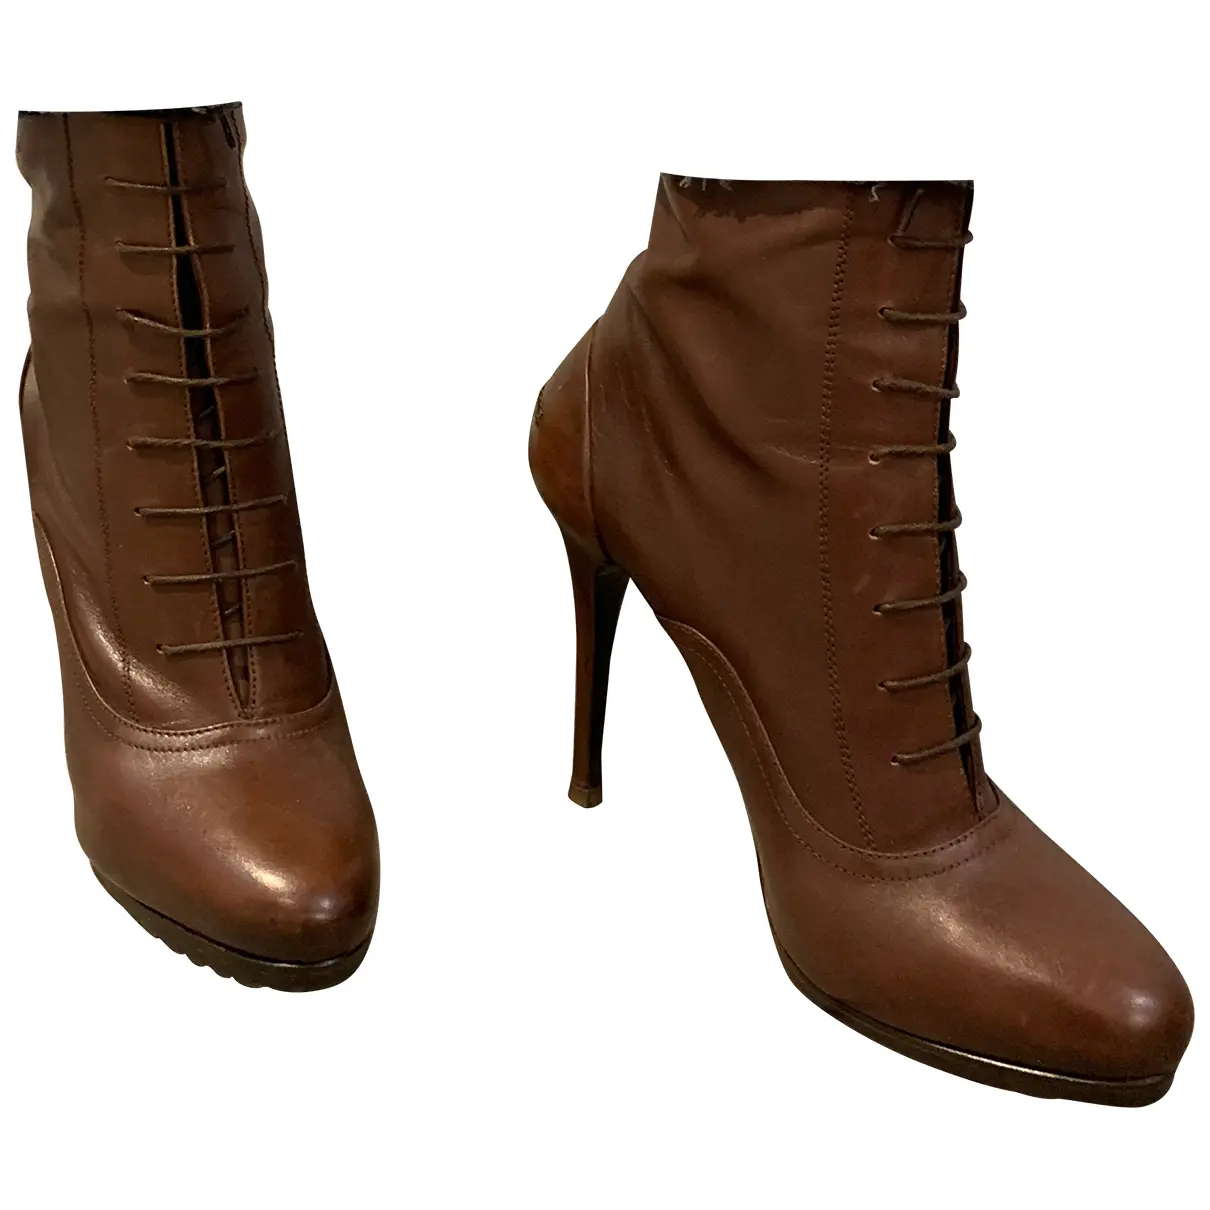 Leather lace up boots Ralph Lauren Collection